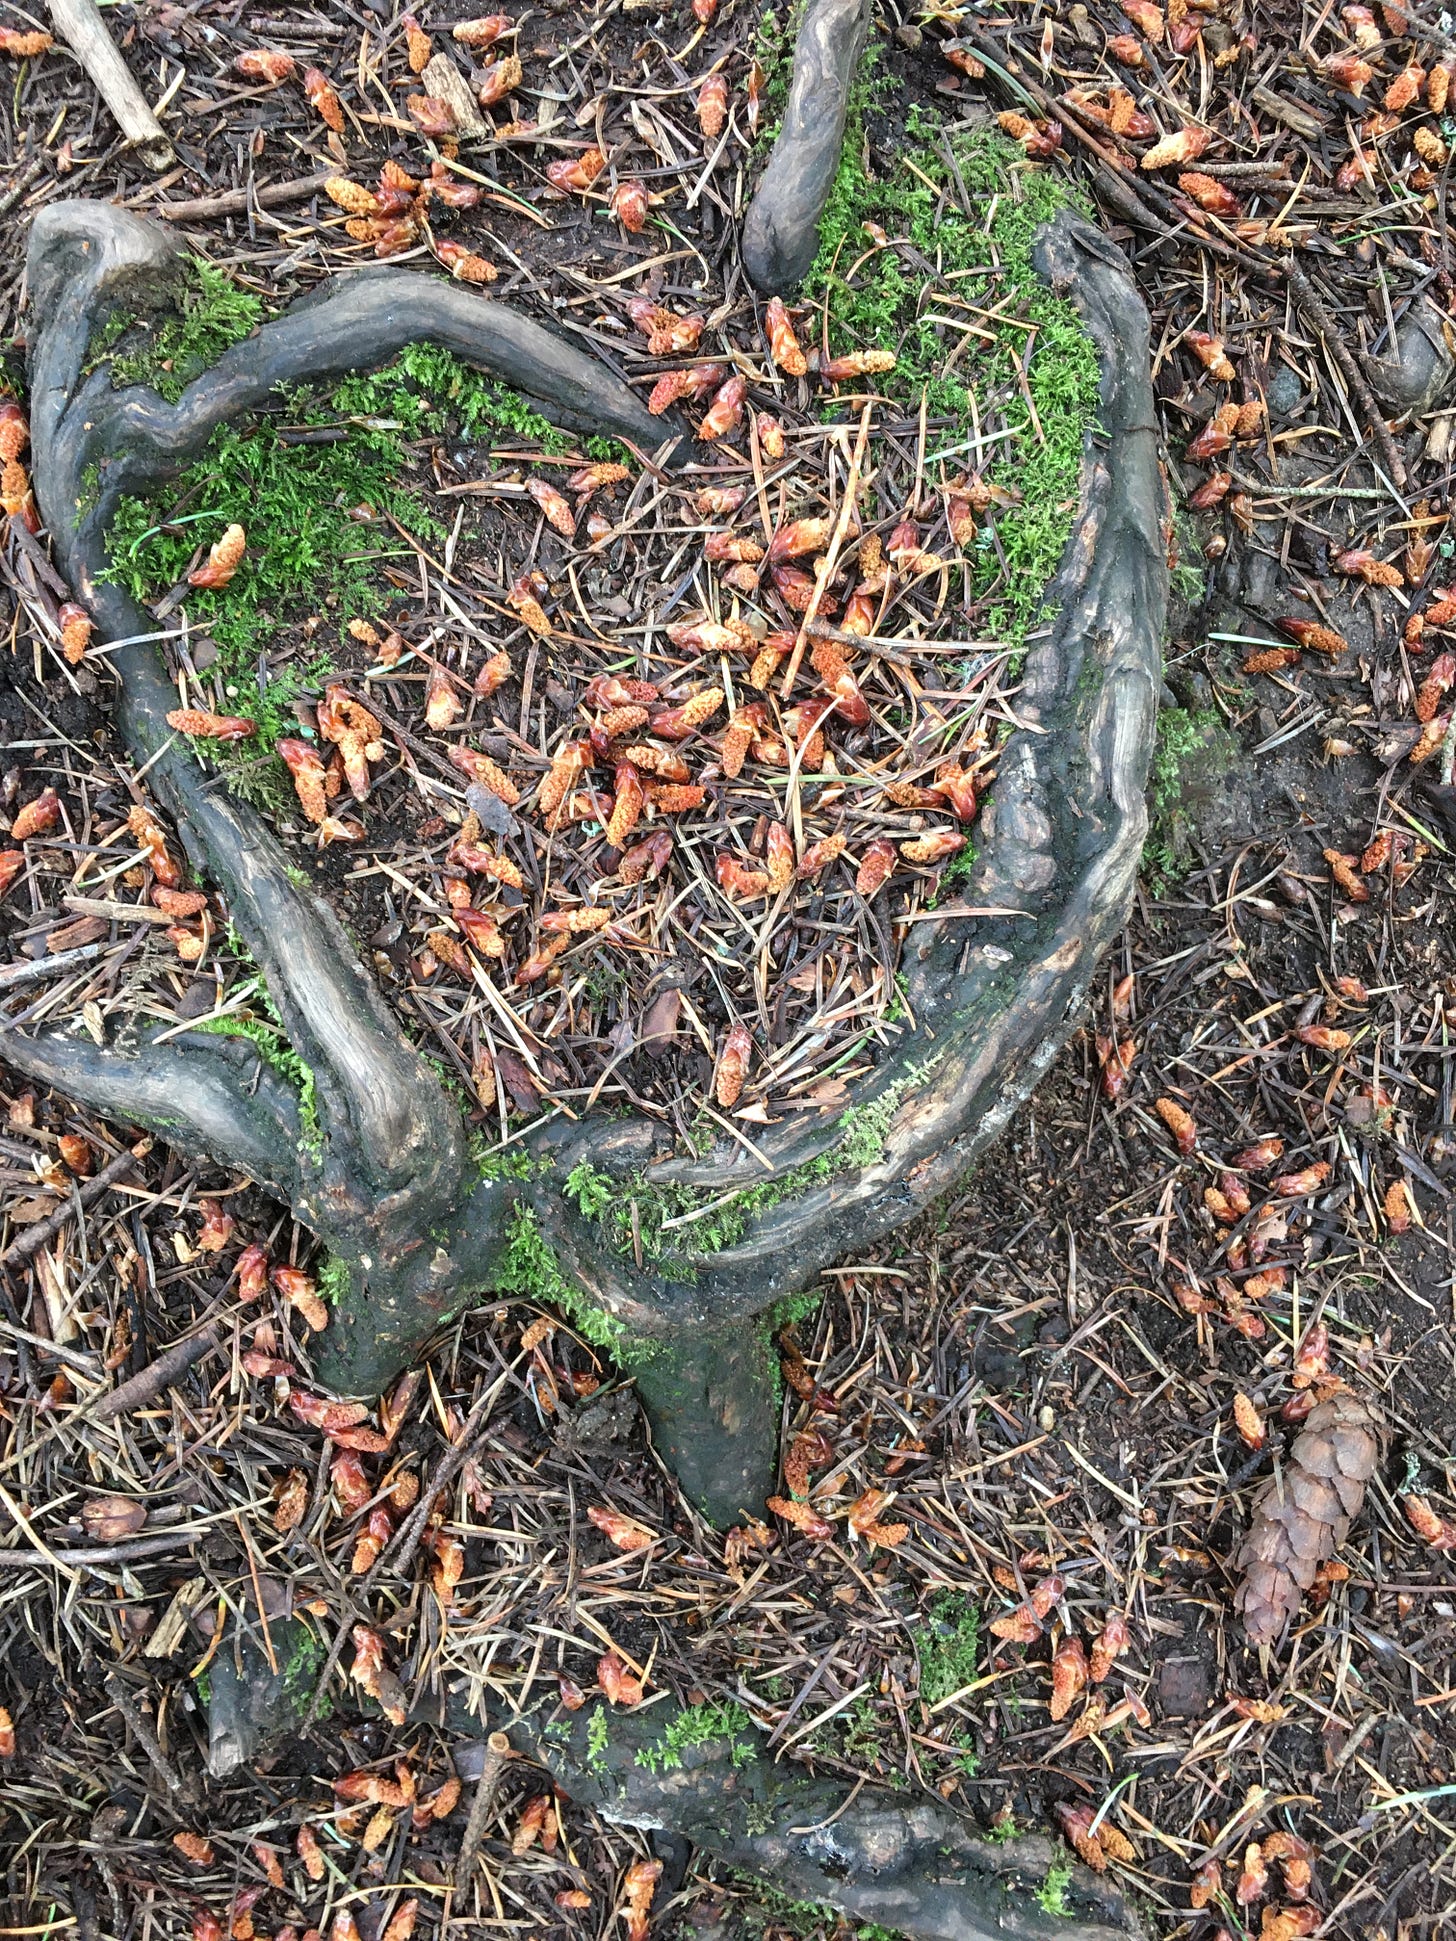 right in the middle of a frequented forested path sits tree roots in the shape of a raised heart with moss growing at both humps and base of the heart. Tree seeds, pinecones, and other natural debris tending to the soft earth.